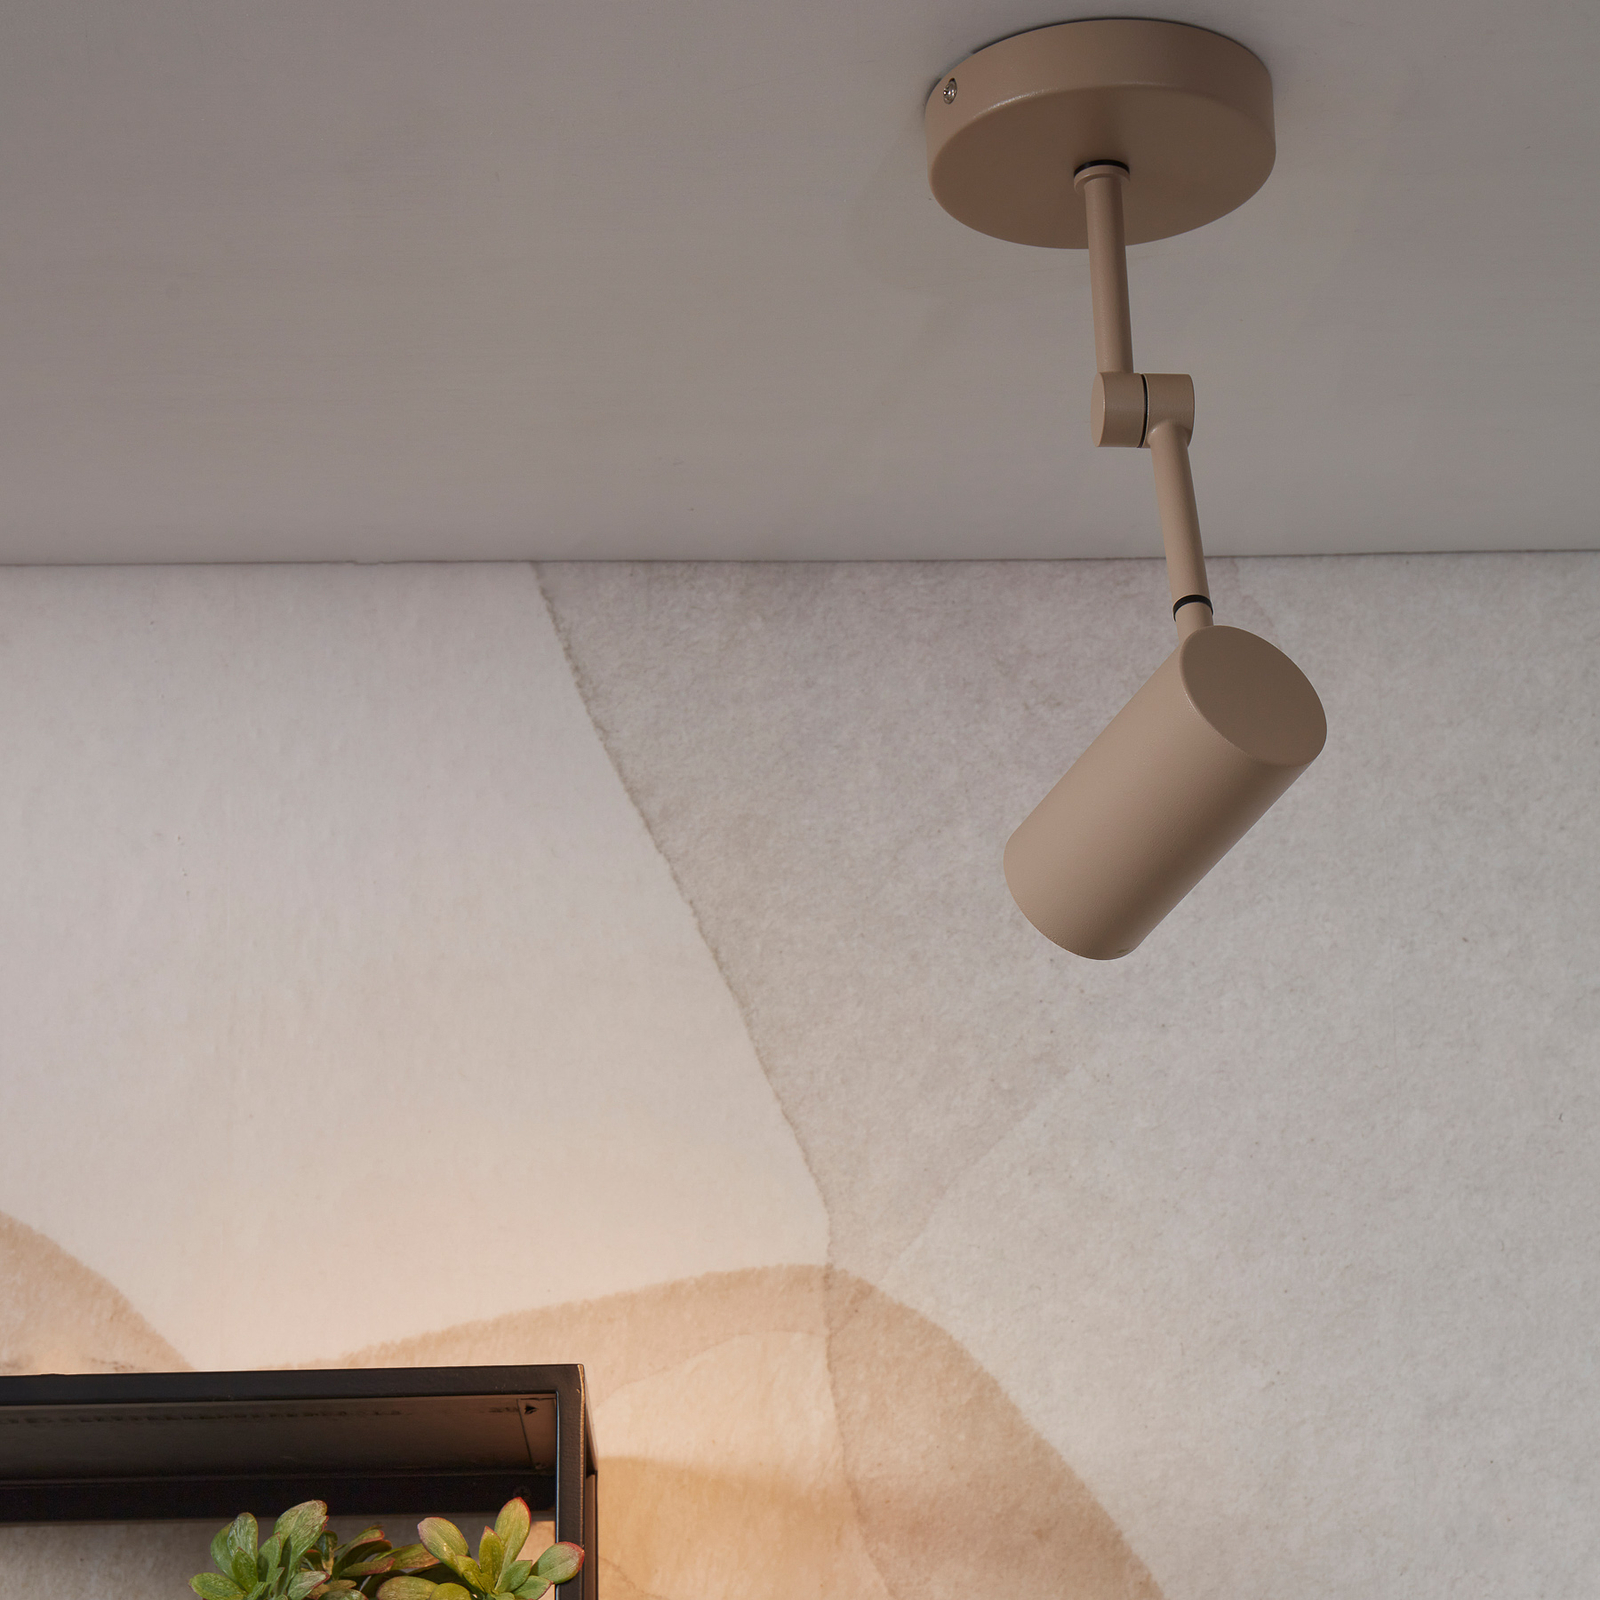 It's about RoMi downlight Montreux, sand, adjustable